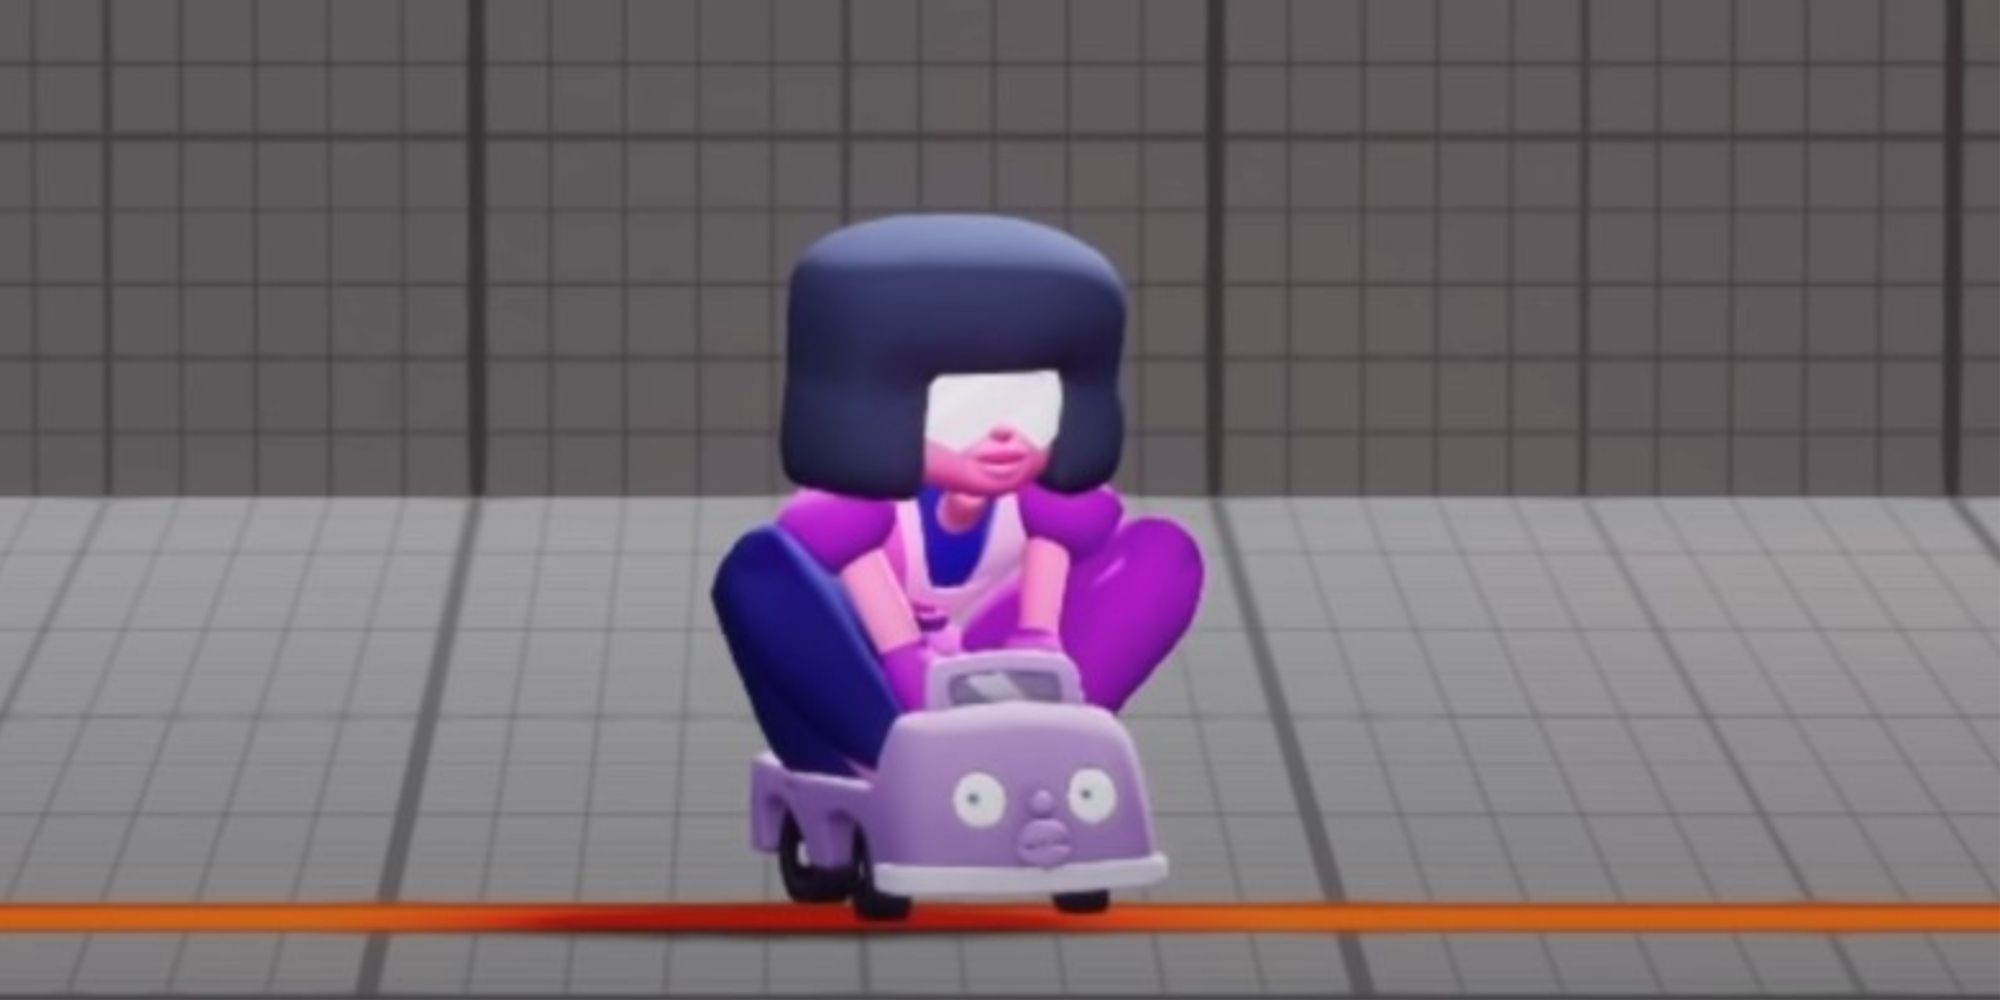 Multiversus Garnet Riding In A Car For Her Taunt